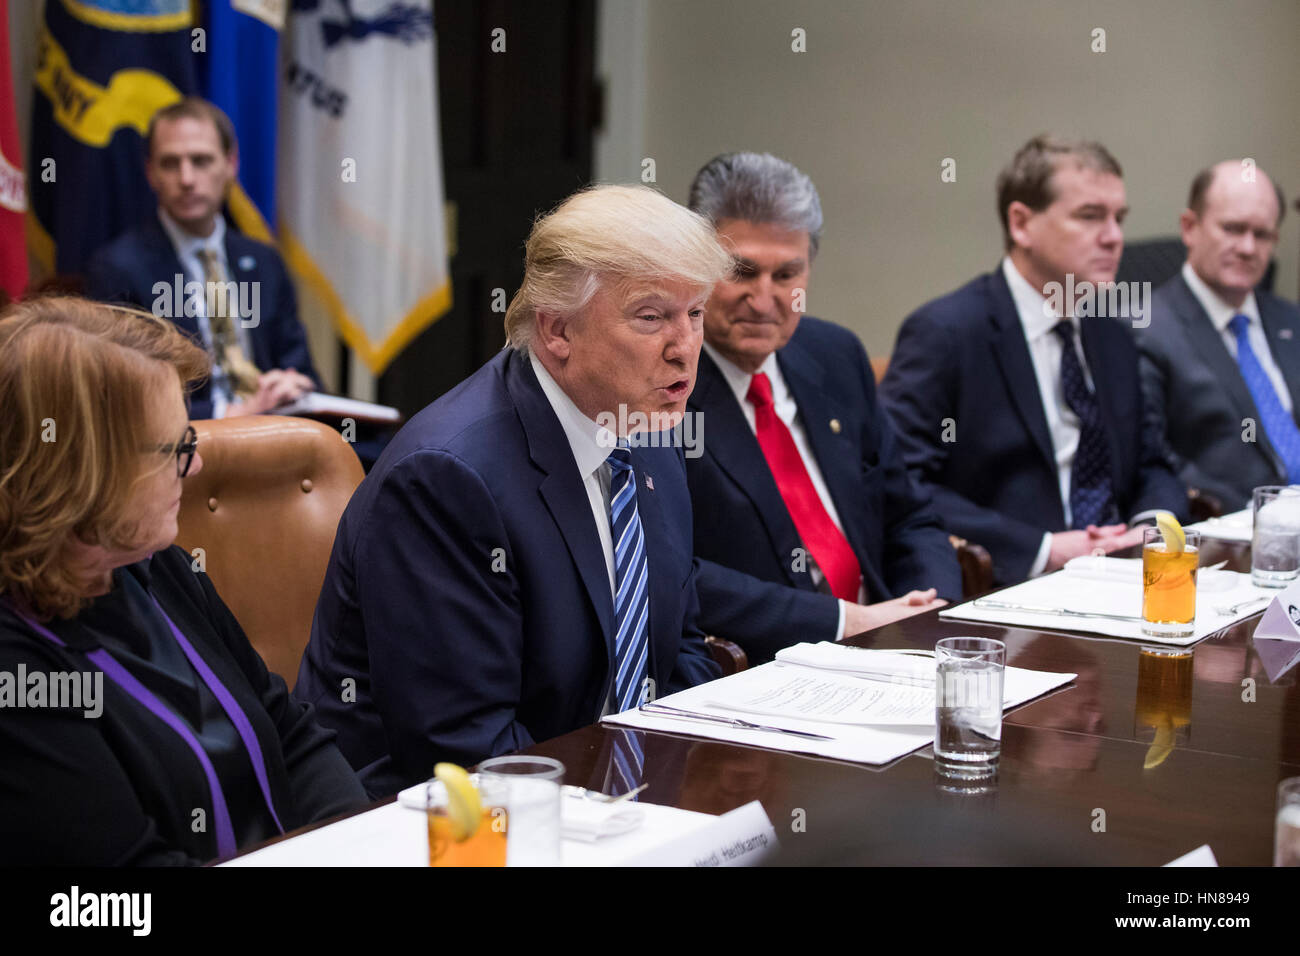 Washington, DC, USA. 9th Feb, 2017. U.S. President Donald J. Trump speaks to Democratic and Republican Senators about his Supreme Court nominee Neil Gorsuch in the Roosevelt Room of the White House in Washington, DC, USA, 09 February 2017. On 08 February, Stock Photo